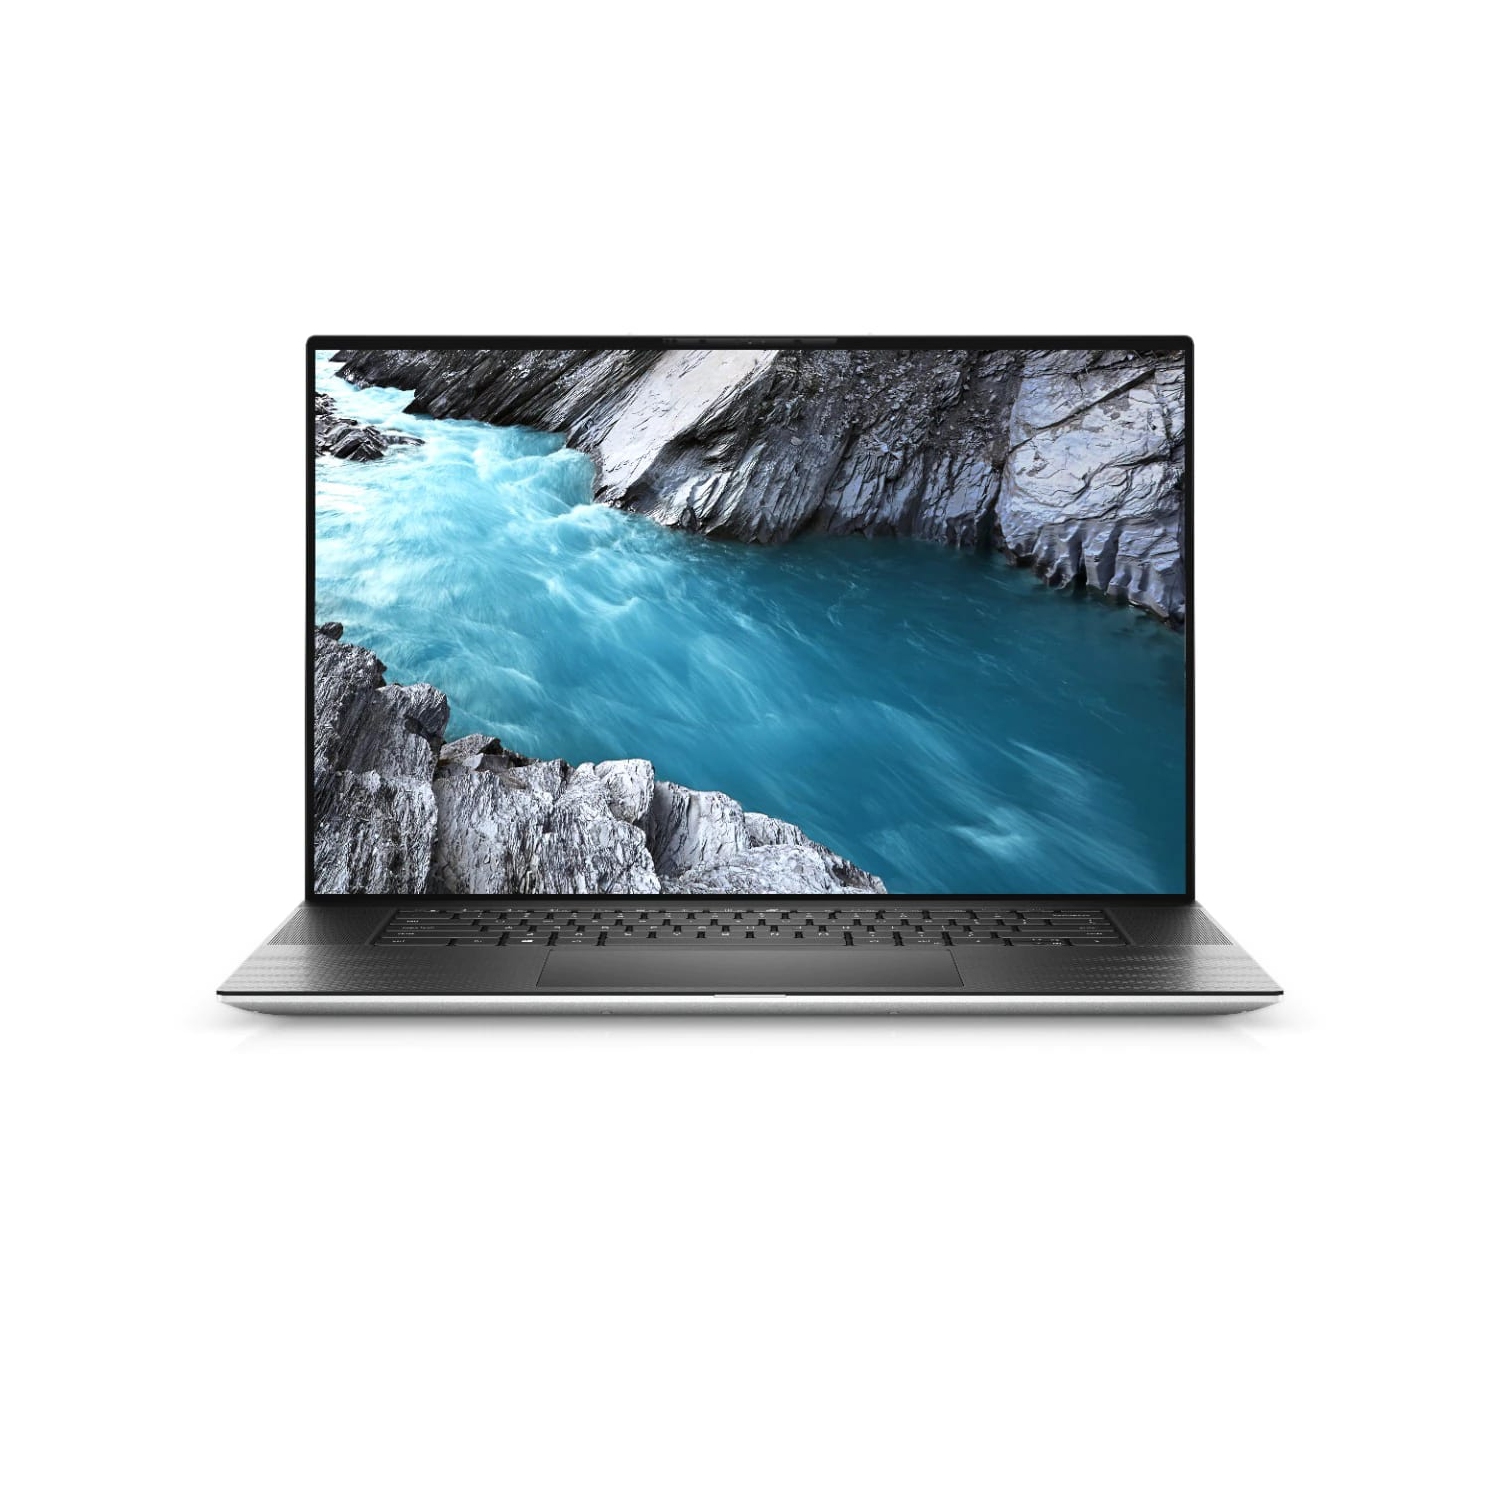 Refurbished (Excellent) - Dell XPS 17 9700 Laptop (2020) | 17" FHD+ | Core i7 - 2TB SSD - 32GB RAM - RTX 2060 | 8 Cores @ 5.1 GHz - 10th Gen CPU Certified Refurbished